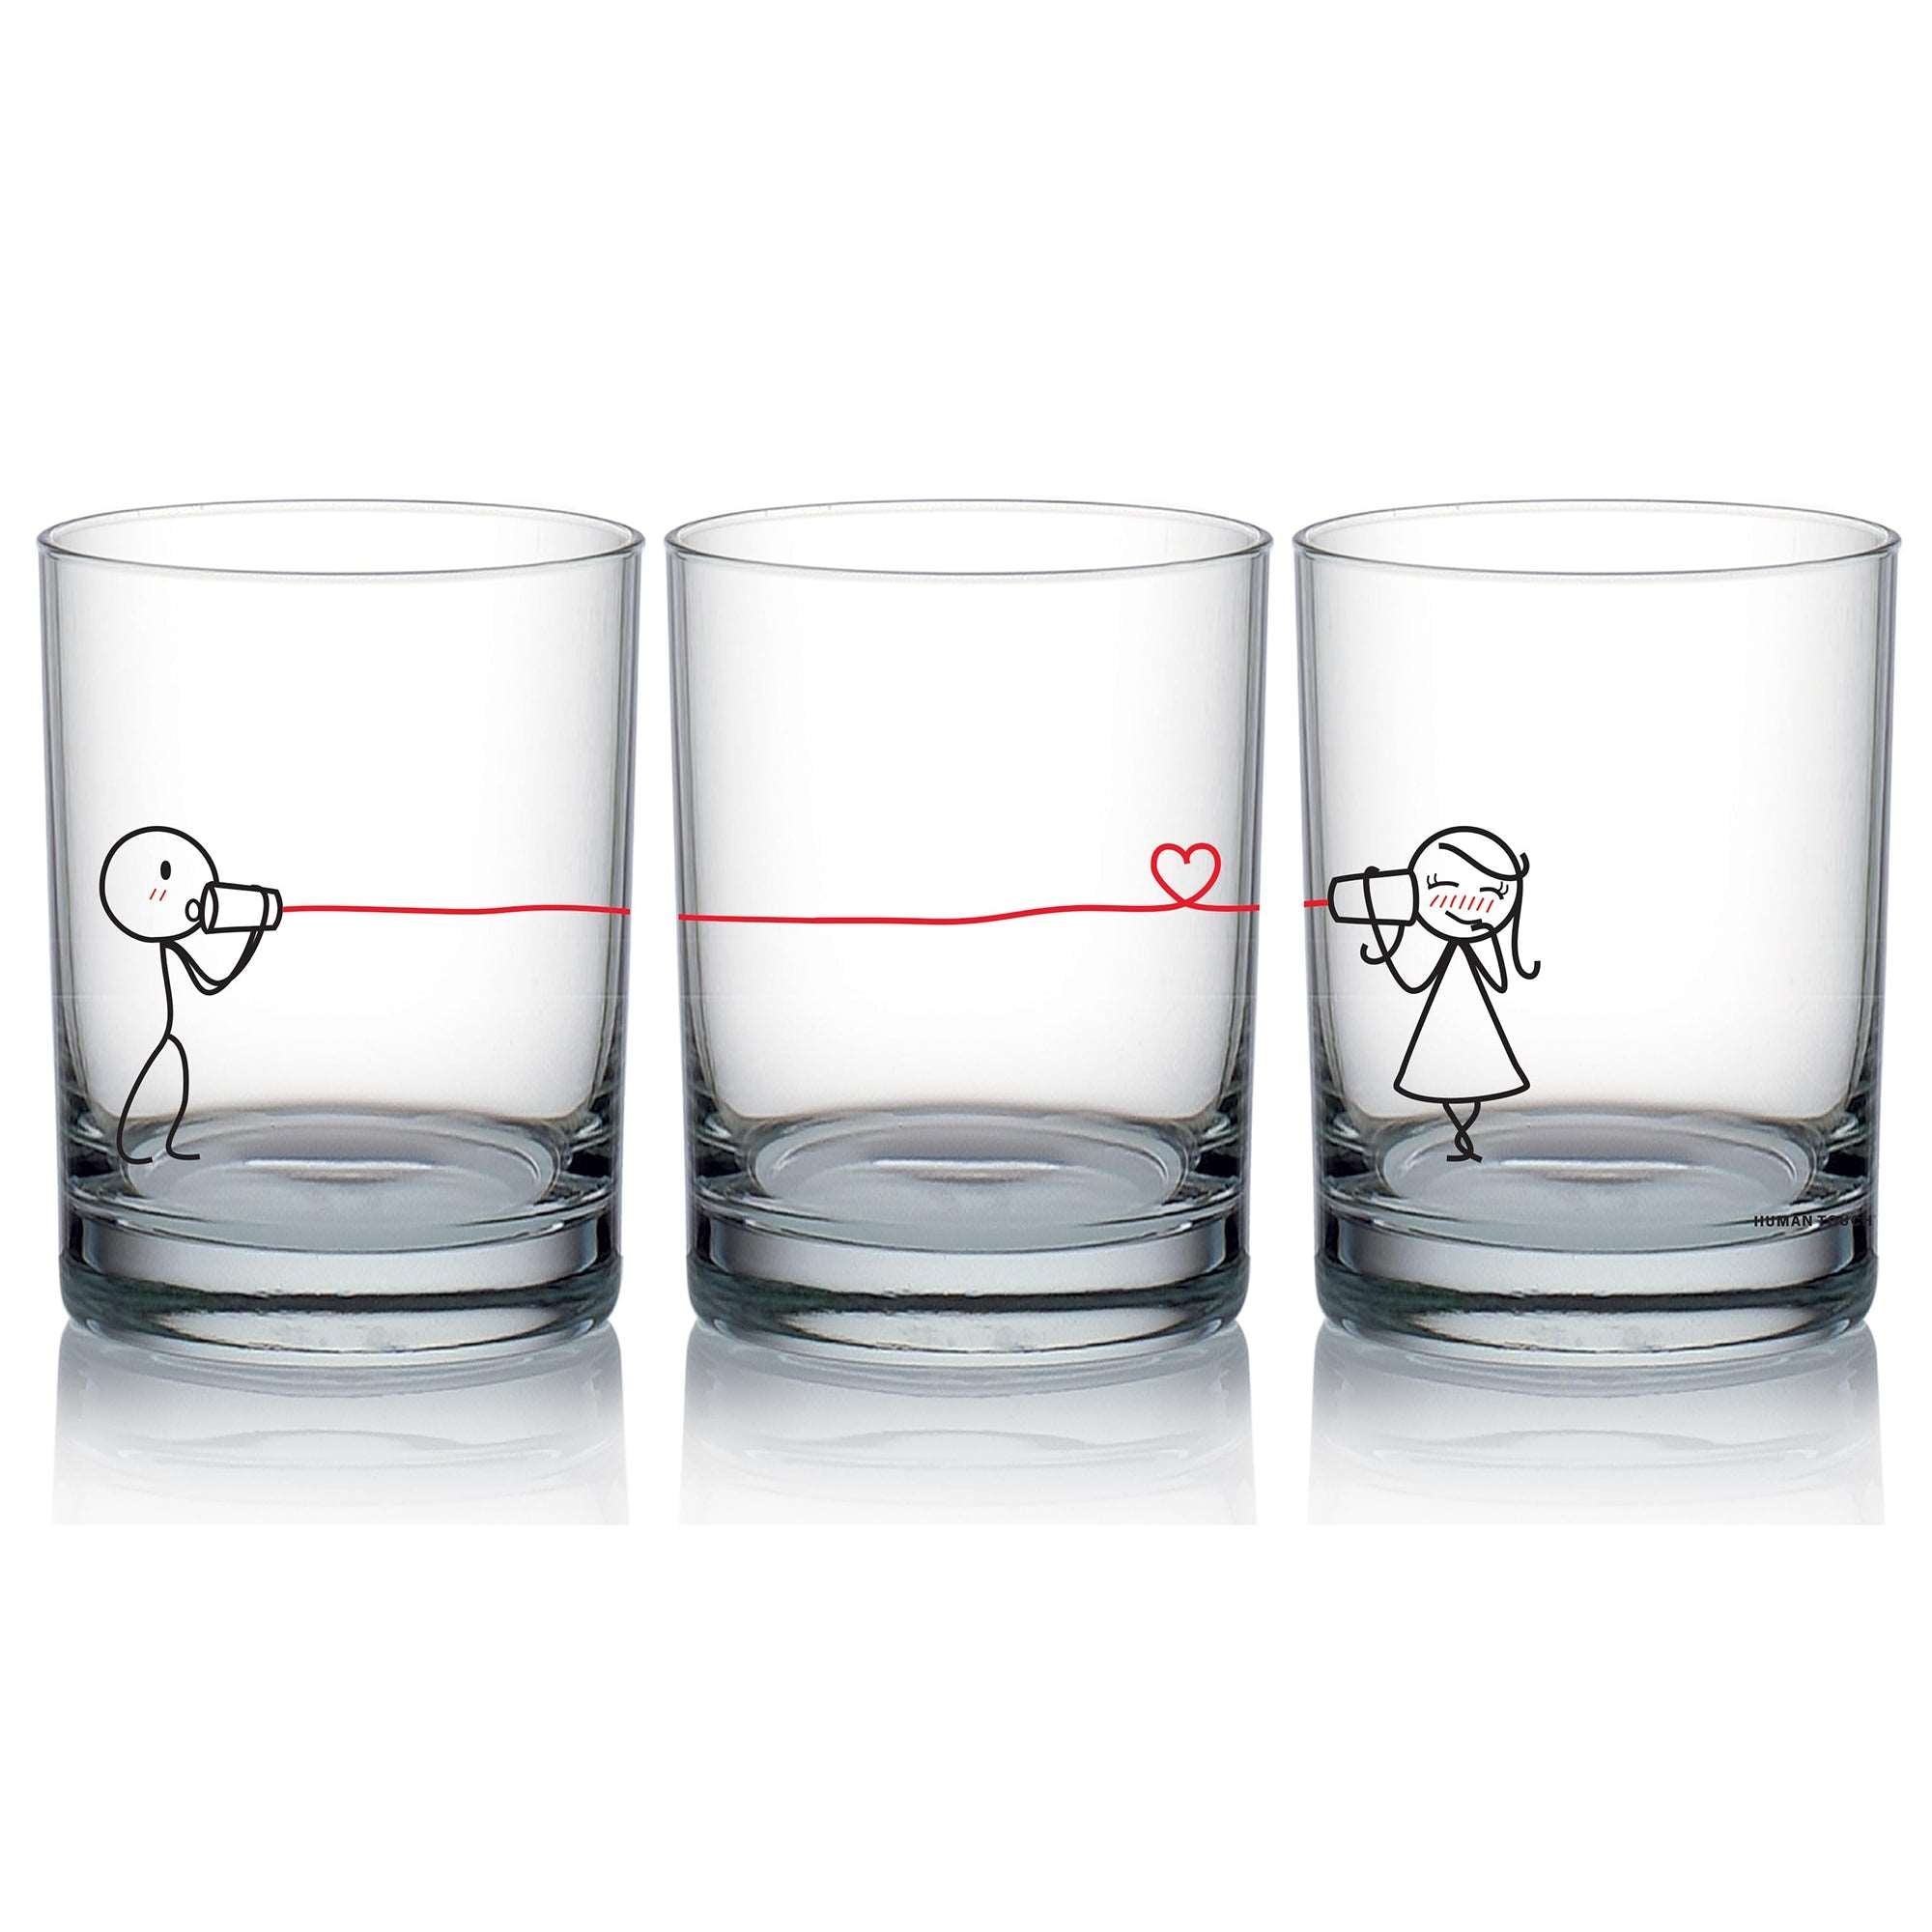 These unique glasses feature adorable drawings, making them a perfect gift for couples and a charming choice for anniversary surprises.